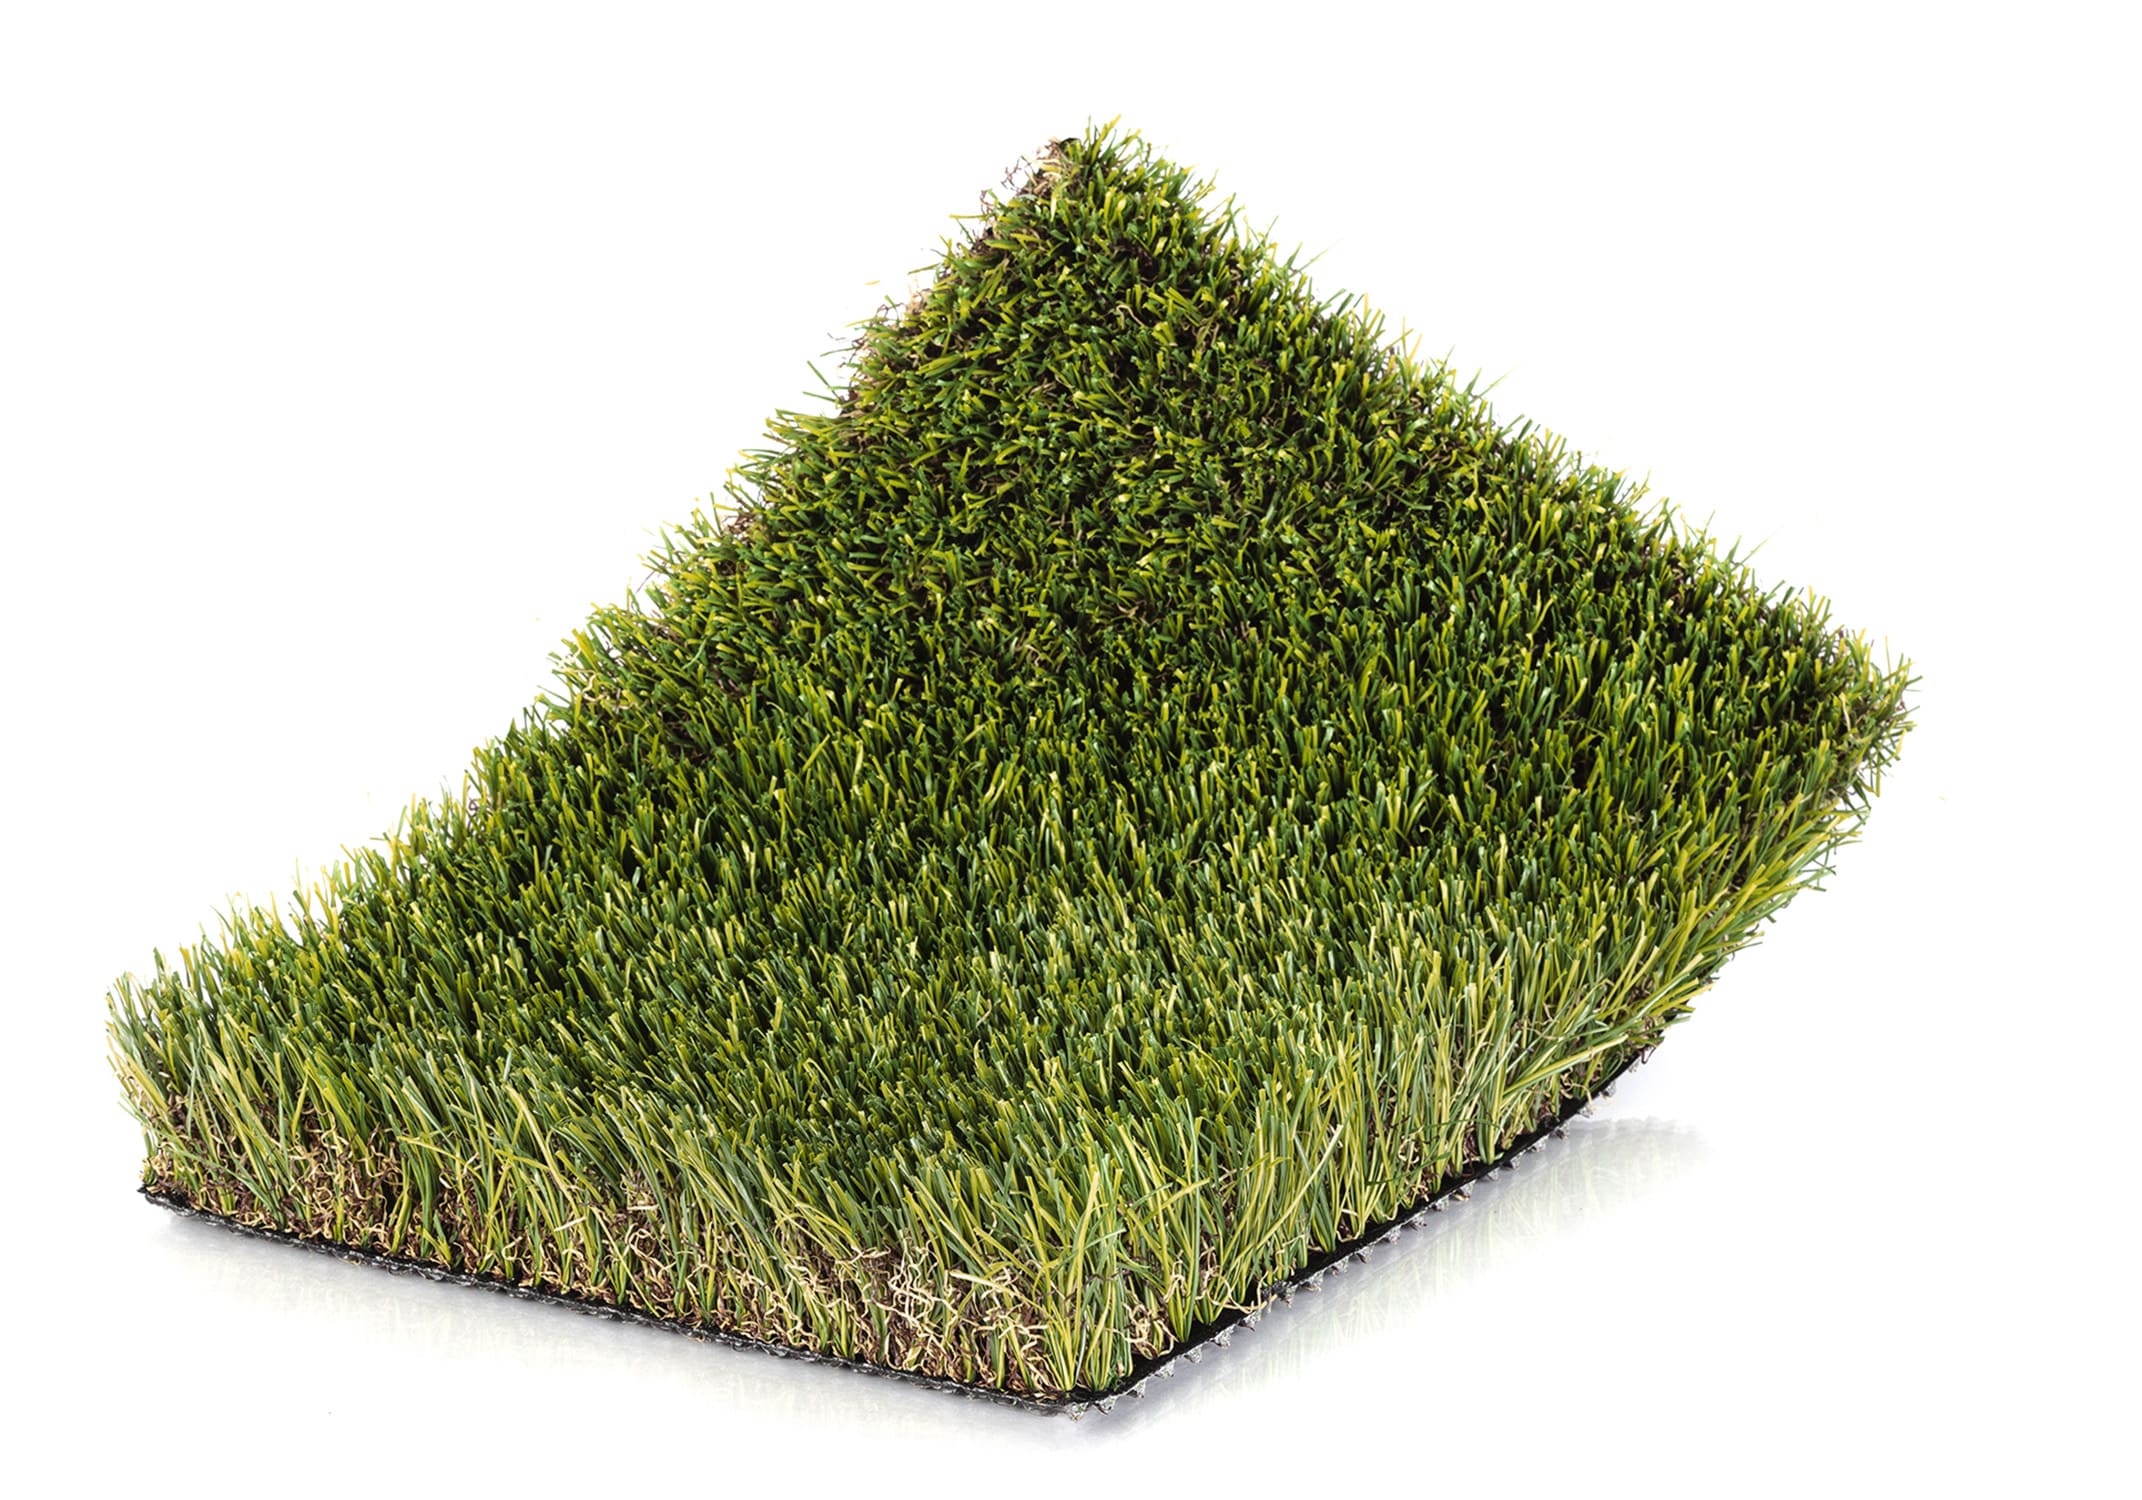 Master-artificial-turf-01